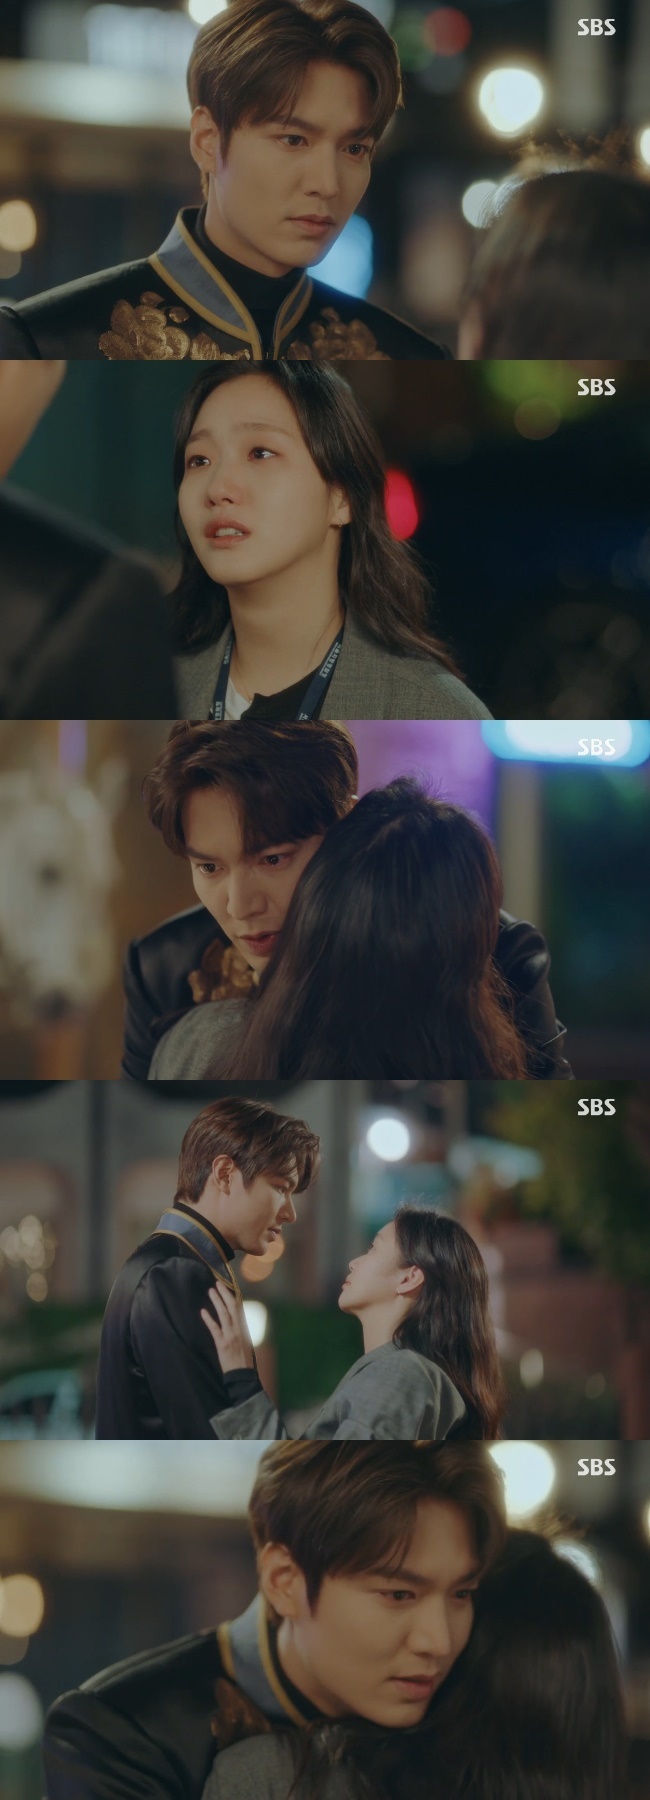 Lee Min-ho searches for Kim Go-eun after the on-spaceIn the 16th episode of SBSs Golden Earth Drama The King: The Lord of Eternity (playplayed by Kim Eun-sook/directed by Baek Sang-hoon, Jung Ji-hyun), Lee Min-ho traveled through several parallel worlds and searched for Jeong Tae-eul (Kim Go-eun).Jung Tae-eul met Lee Ji-hoon (Lee Min-ho) who had the same face as Leeon on the road.Lee Ji-hoon passed by his side and Jung Tae-eun sat down and wept as he recalled Lees promise to open the door of the on space.Igon went around the parallel world of Space as promised and found a settlement.Igon, who managed to meet Jung Tae, was embarrassed by his recognition of himself, saying, Why do you think you know me? Why do you think you remember me?Jung Tae-eul said, Is it really here?When I asked, Are you here now? And then Igon found out that the memory of Jeong Tae-eun was not erased, and he said, I finally see you.Lee Ha-na